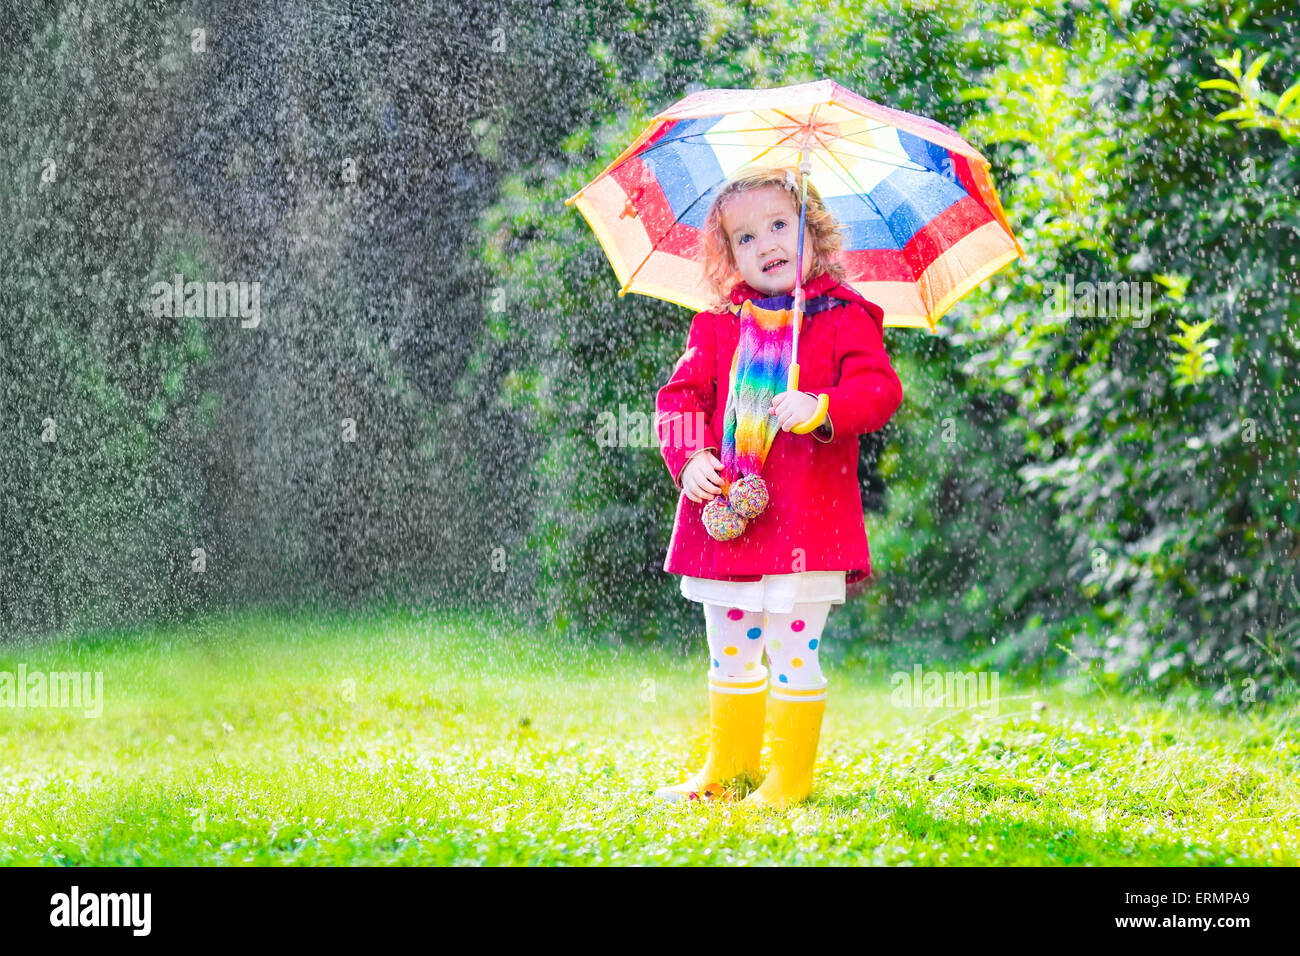 Funny cute toddler girl wearing red waterproof coat and yellow rubber boots holding colorful umbrella playing in garden by rain Stock Photo